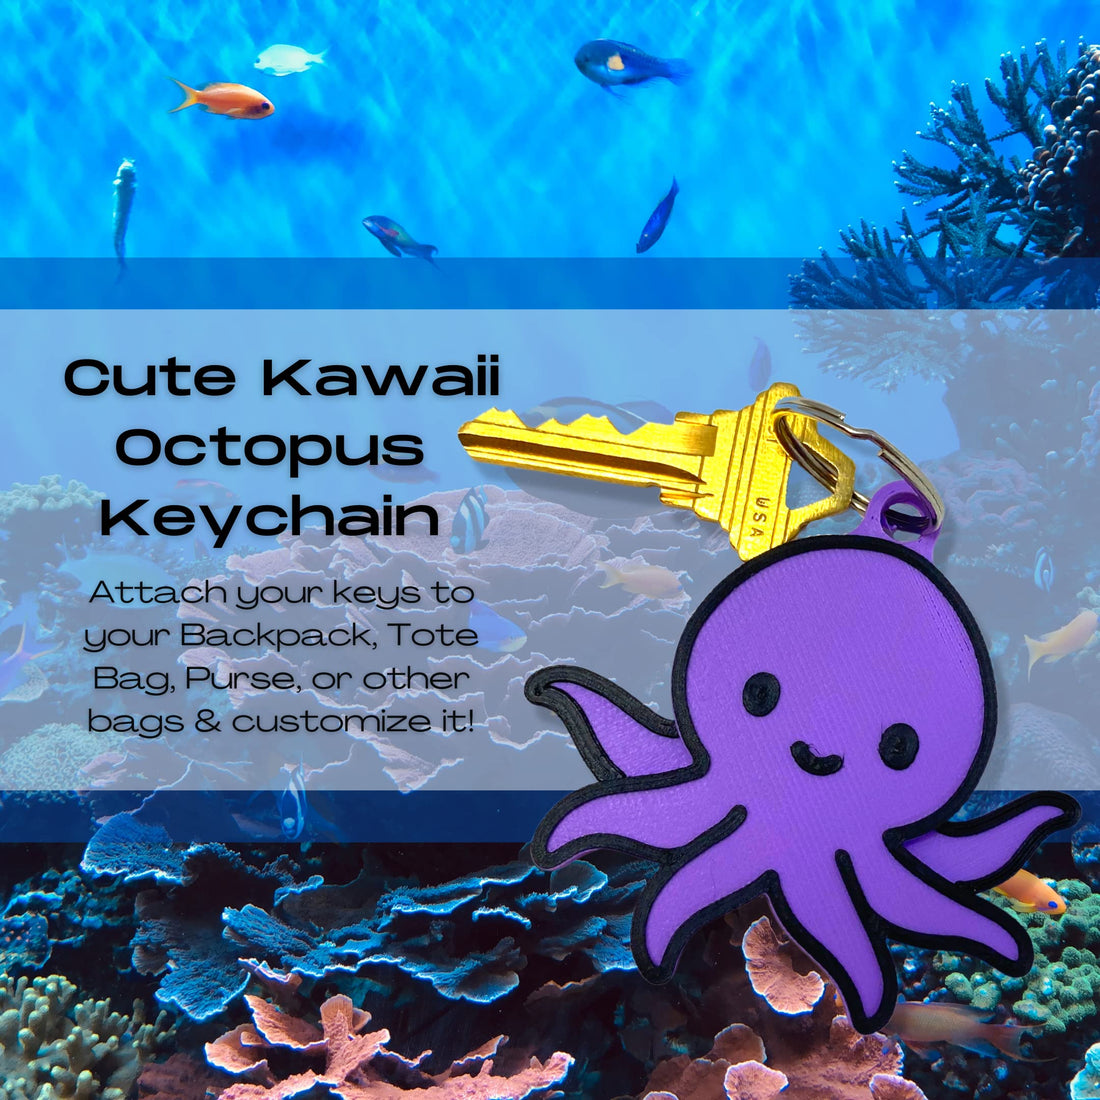 Kawaii Cute Octopus Keychain - Perfect for Hanging your keys. - Decorate your Backpacks, Lunchboxes, Luggage, & Tote Bags Octopus